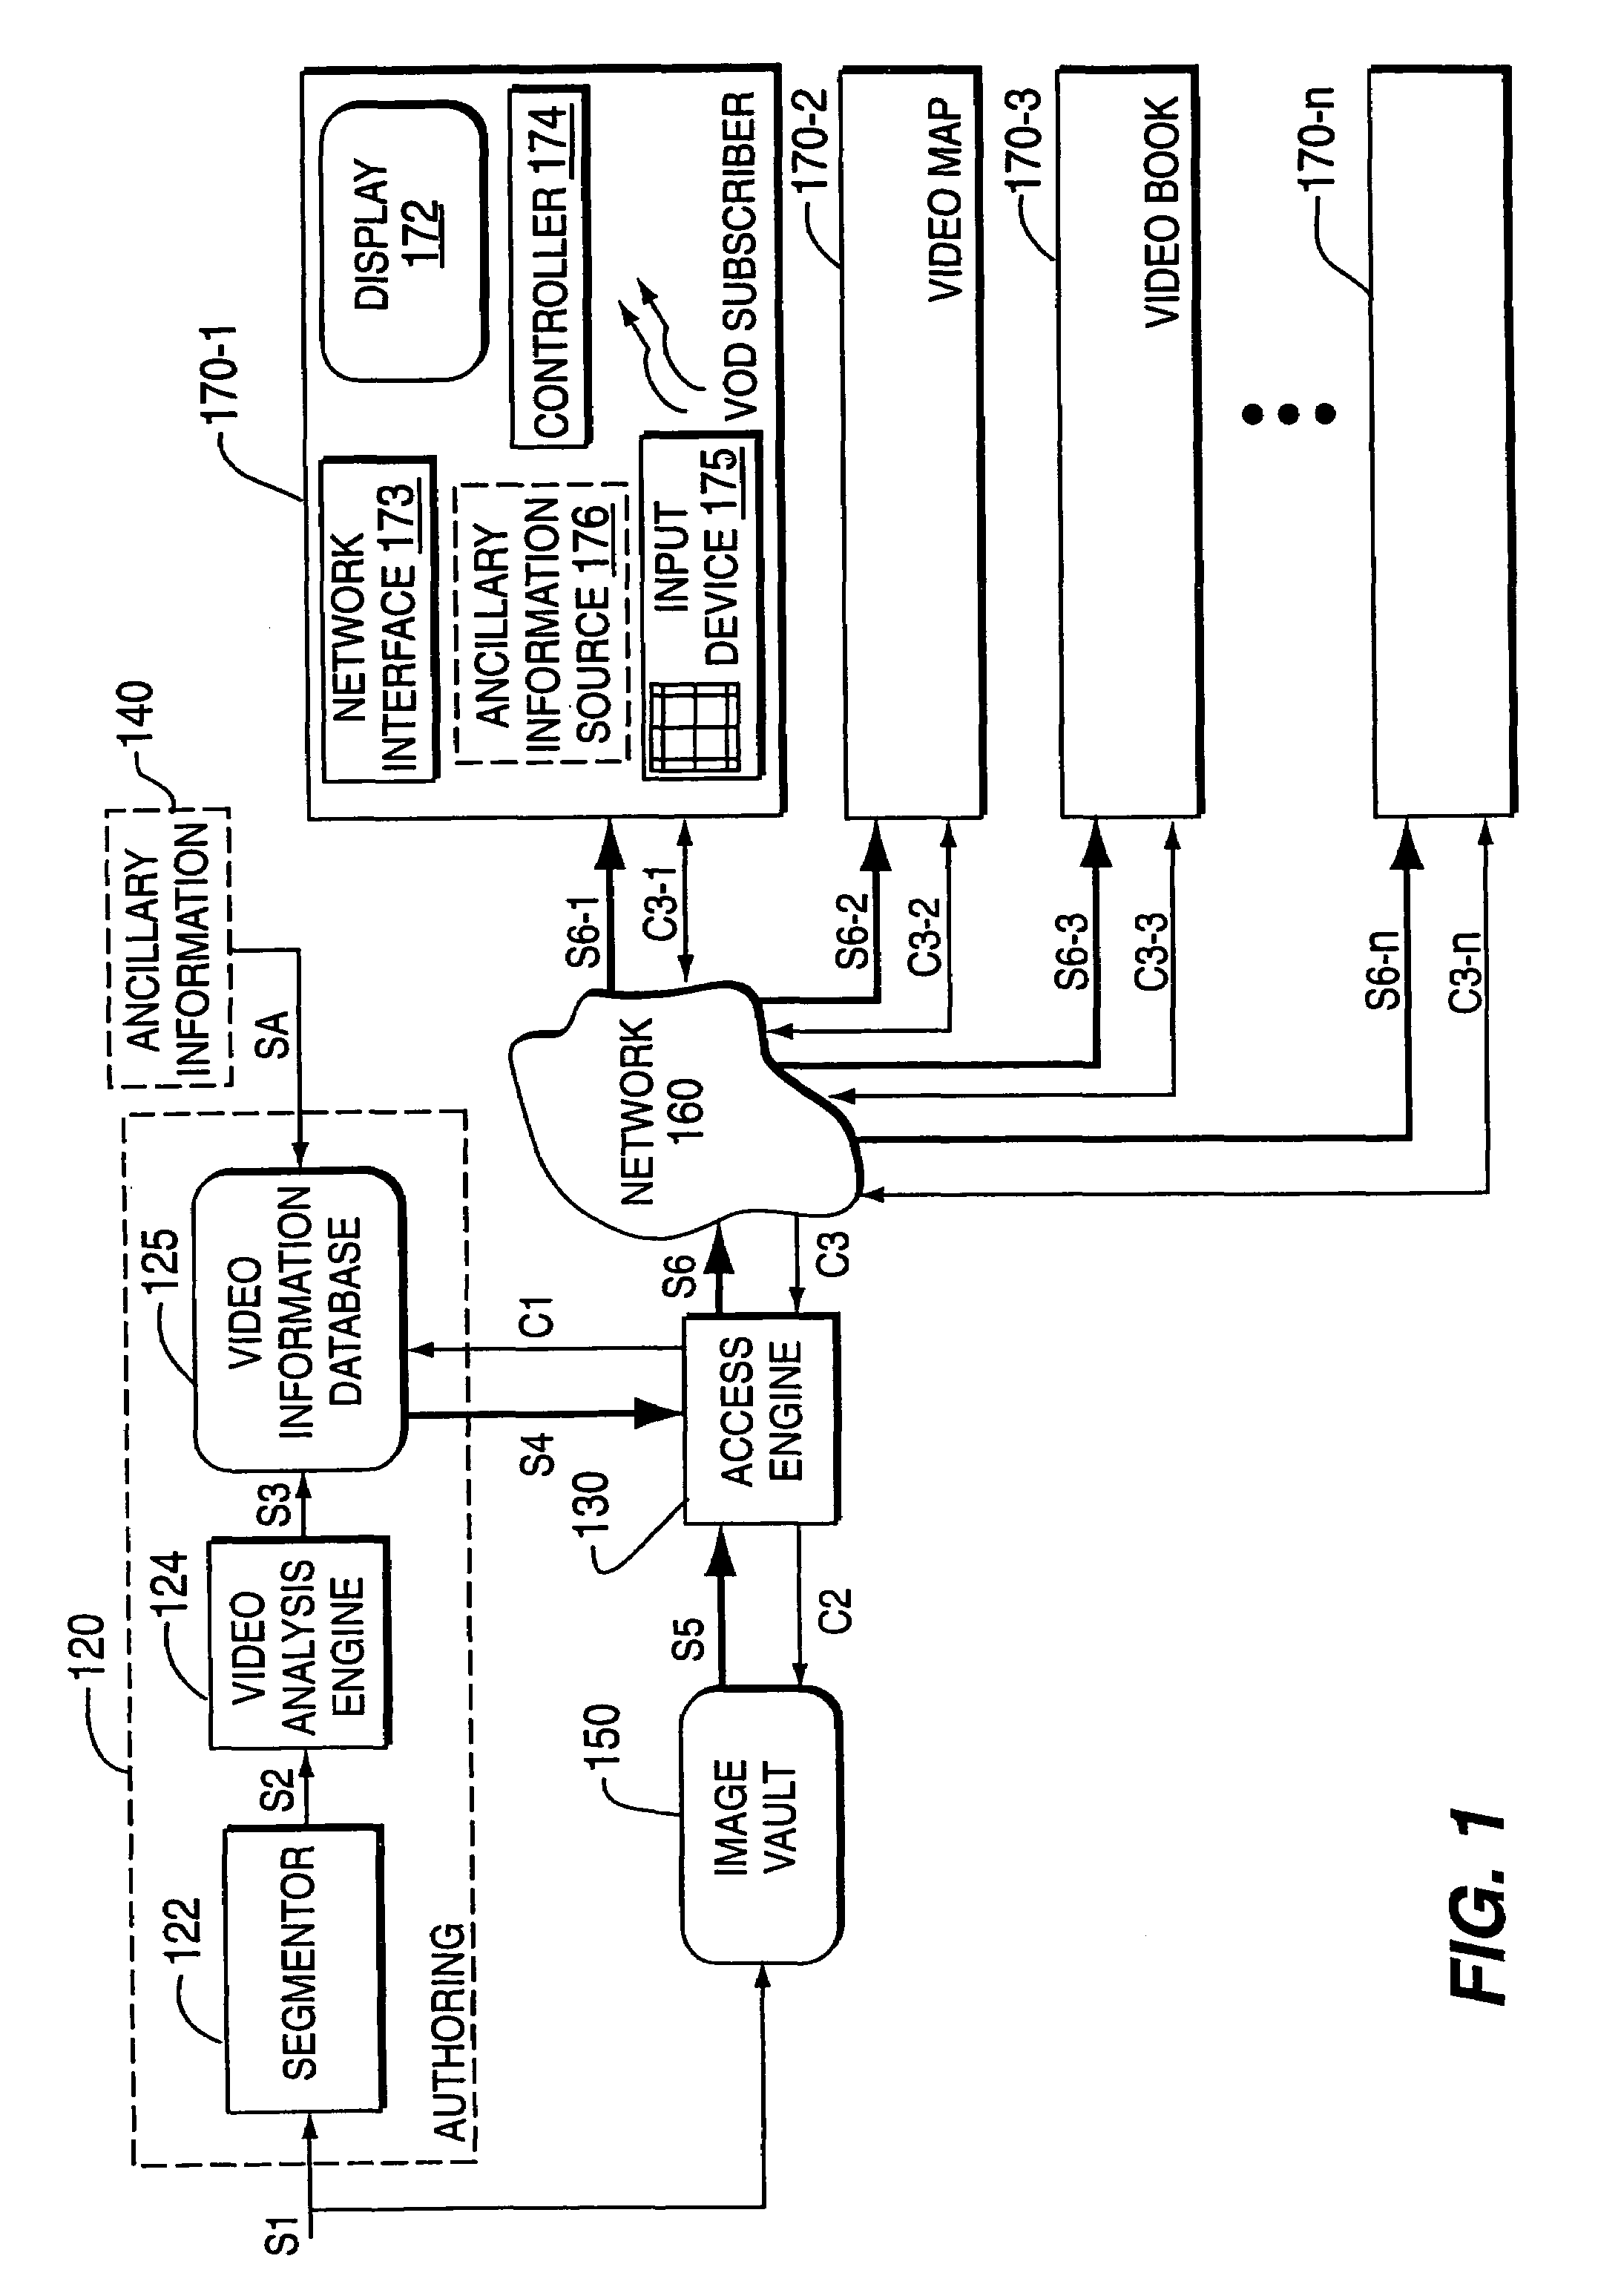 Method and apparatus for efficiently representing storing and accessing video information